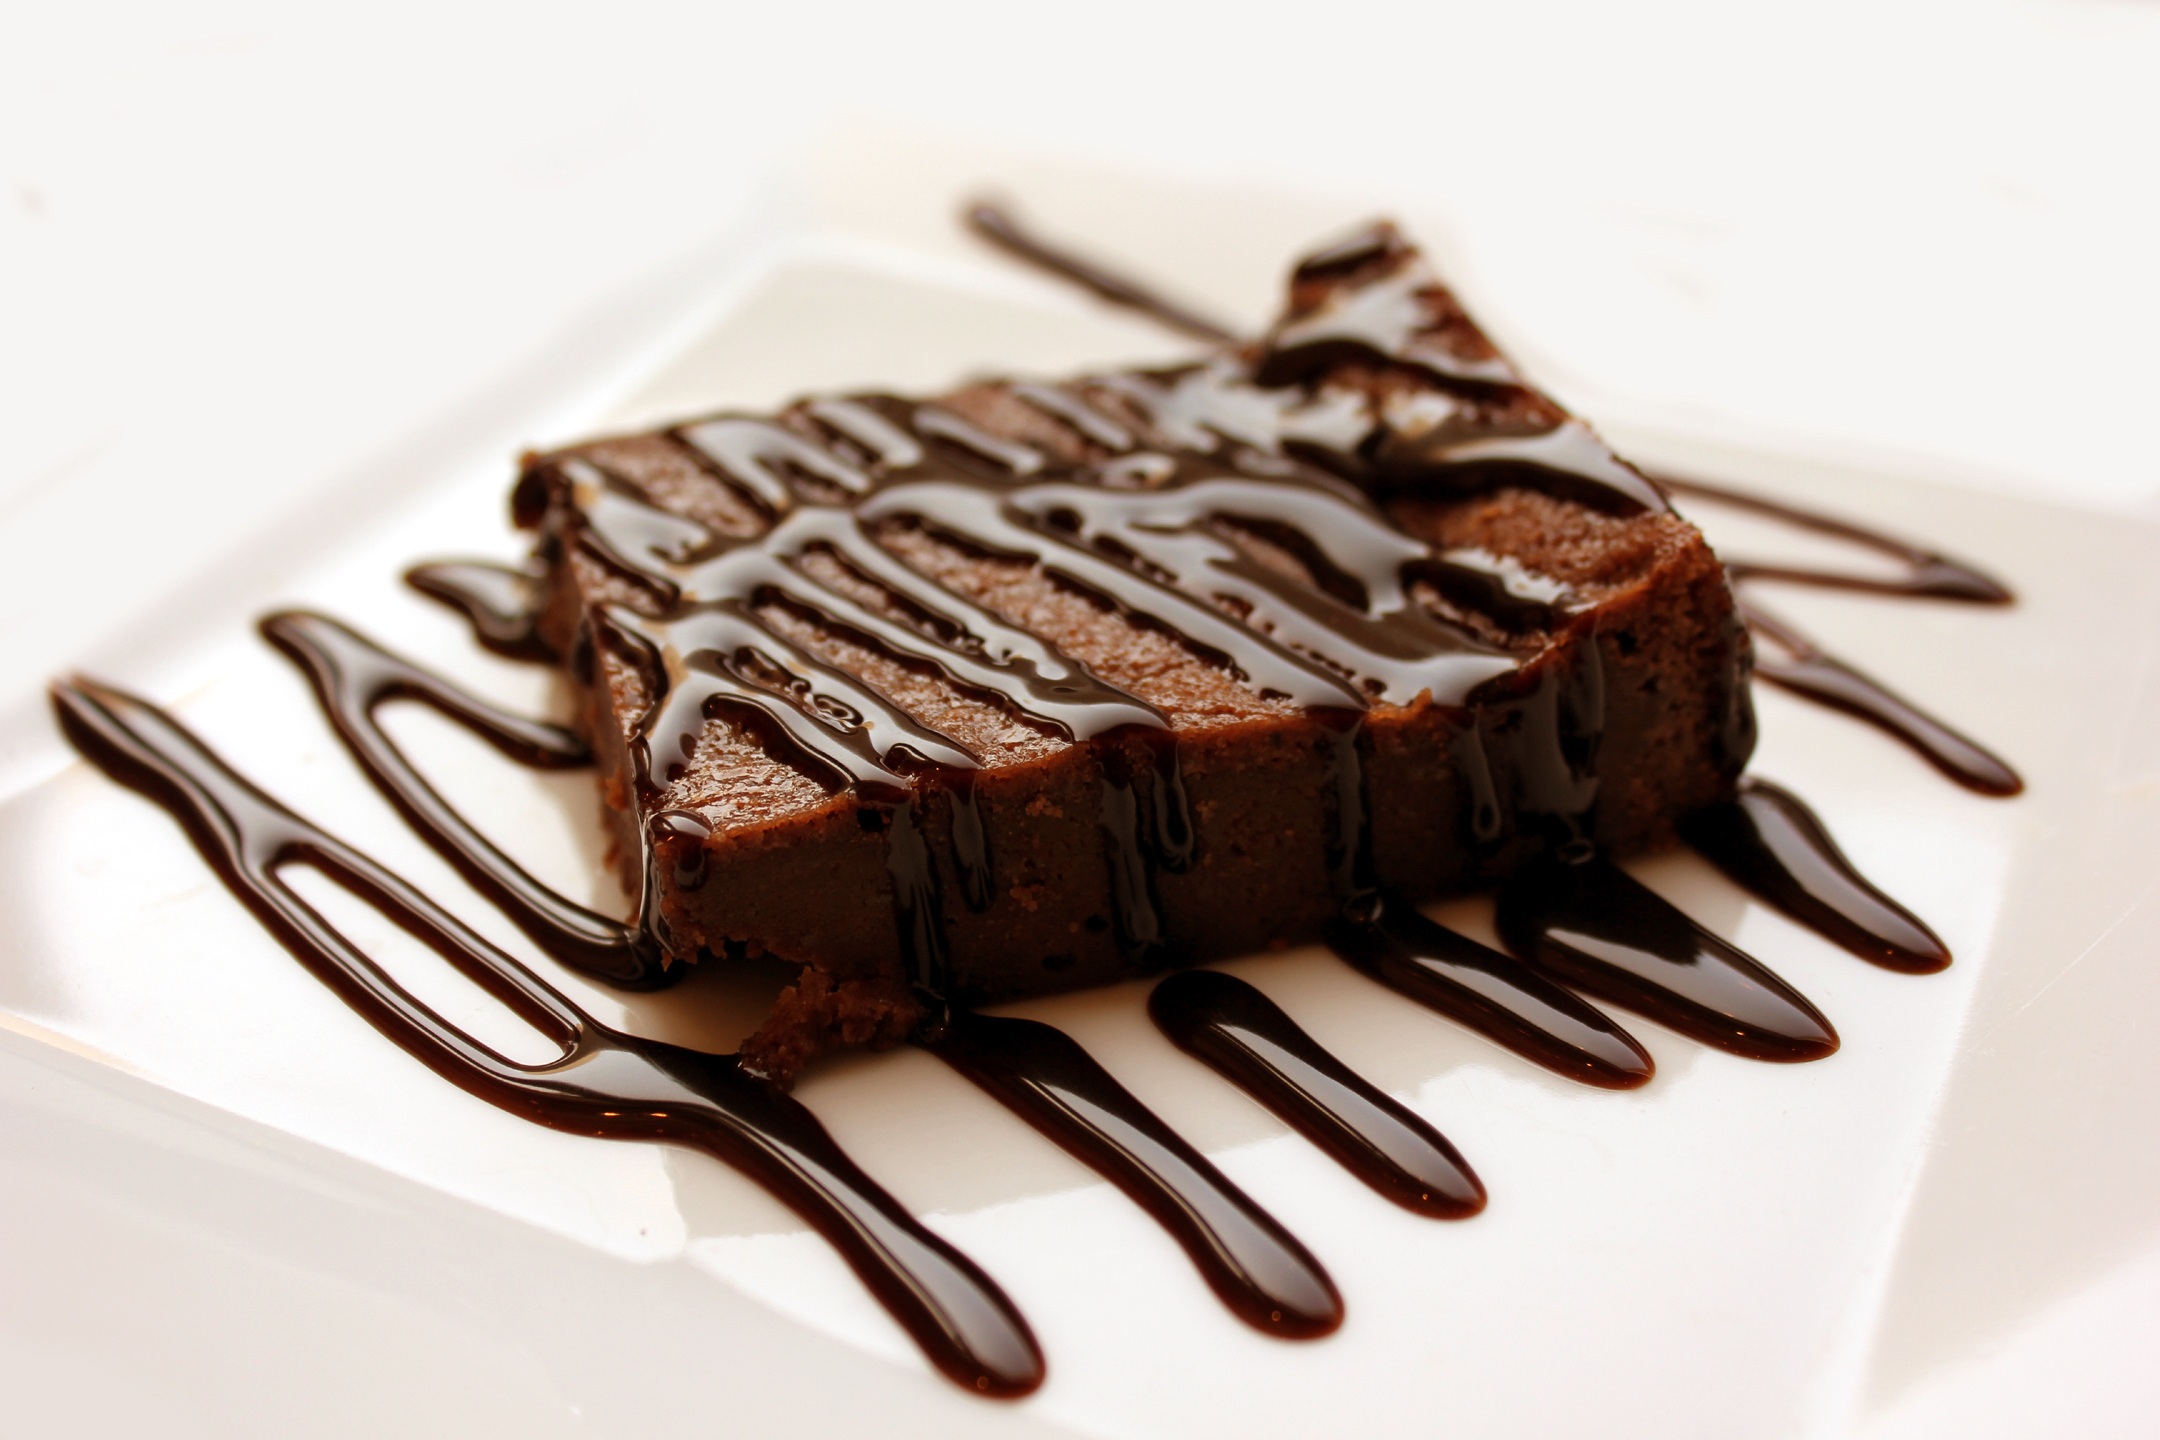 154589 download wallpaper food, chocolate, desert, cream, brownie screensavers and pictures for free